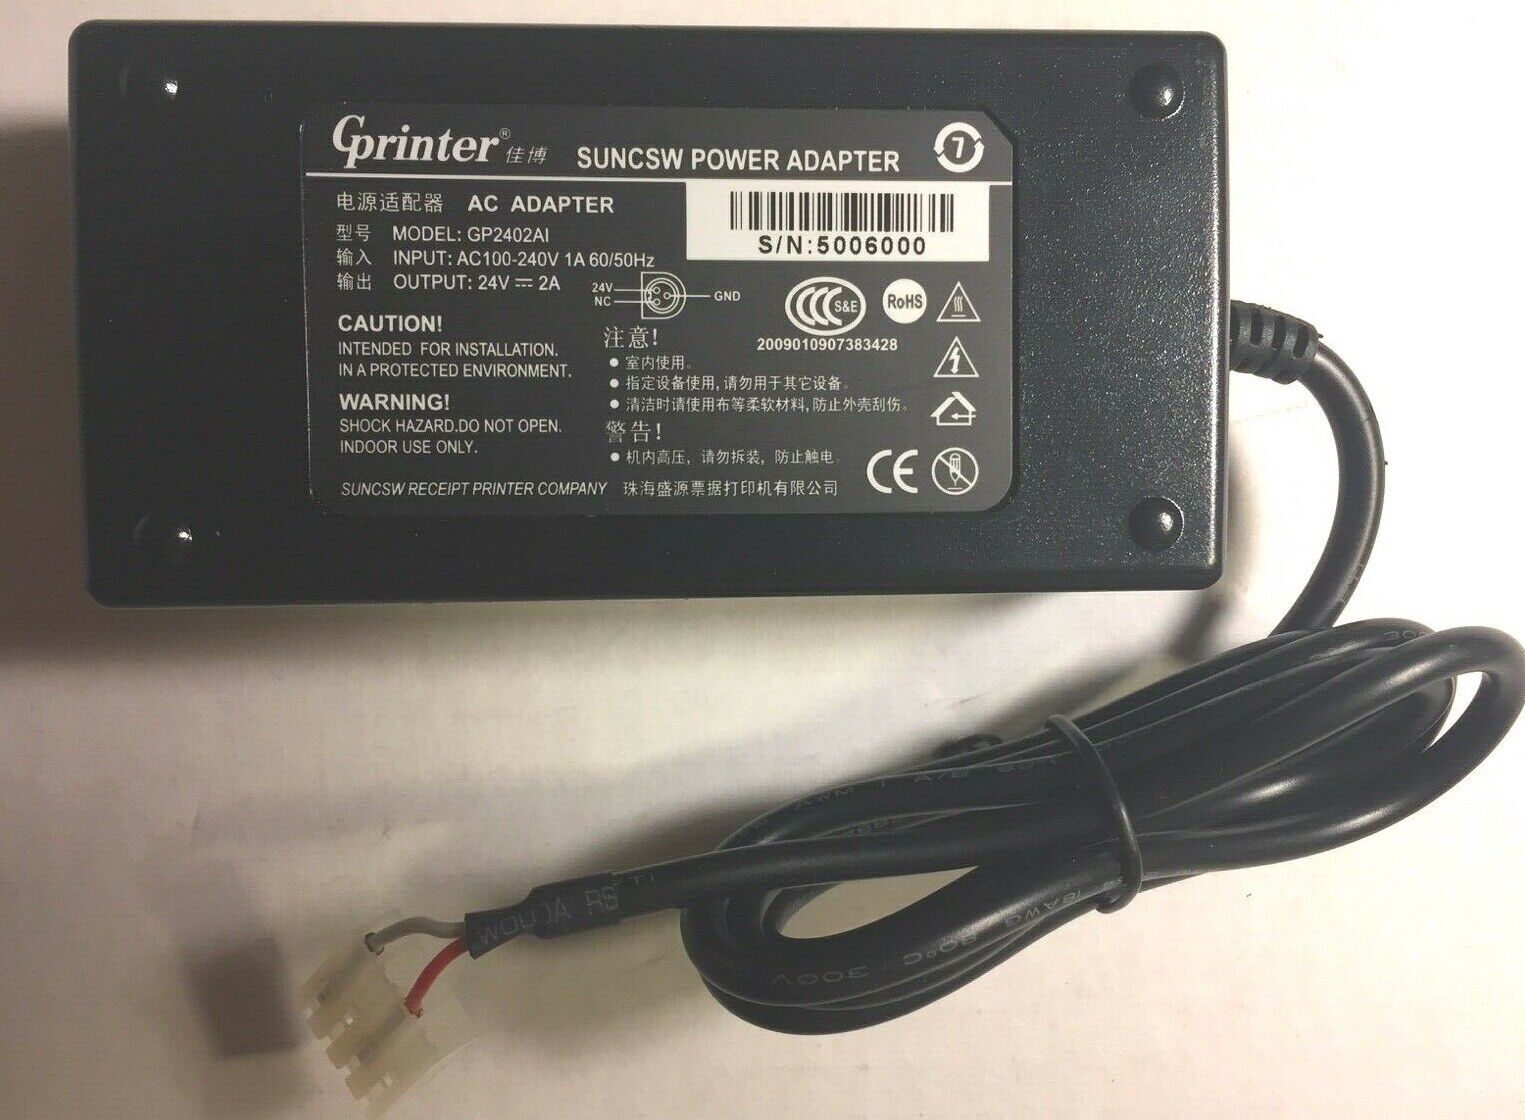 *Brand NEW* 24V 2A AC Adapter. Suncsw Power Adapter, Never Used Gprinter GP-2402AI.